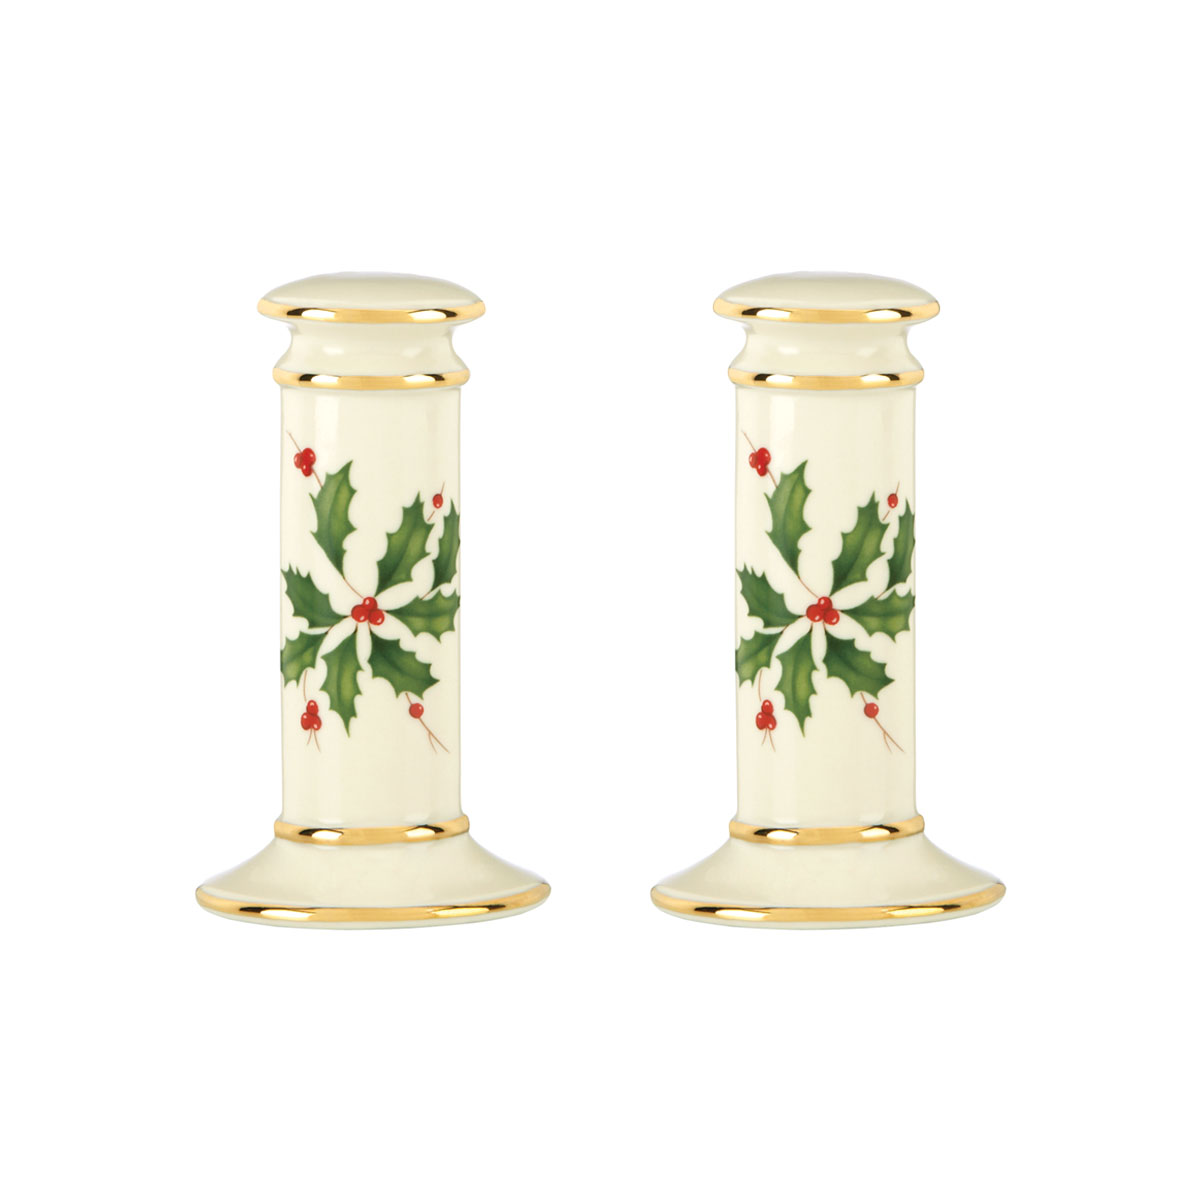 Lenox China Holiday Archive Salt and Pepper Set